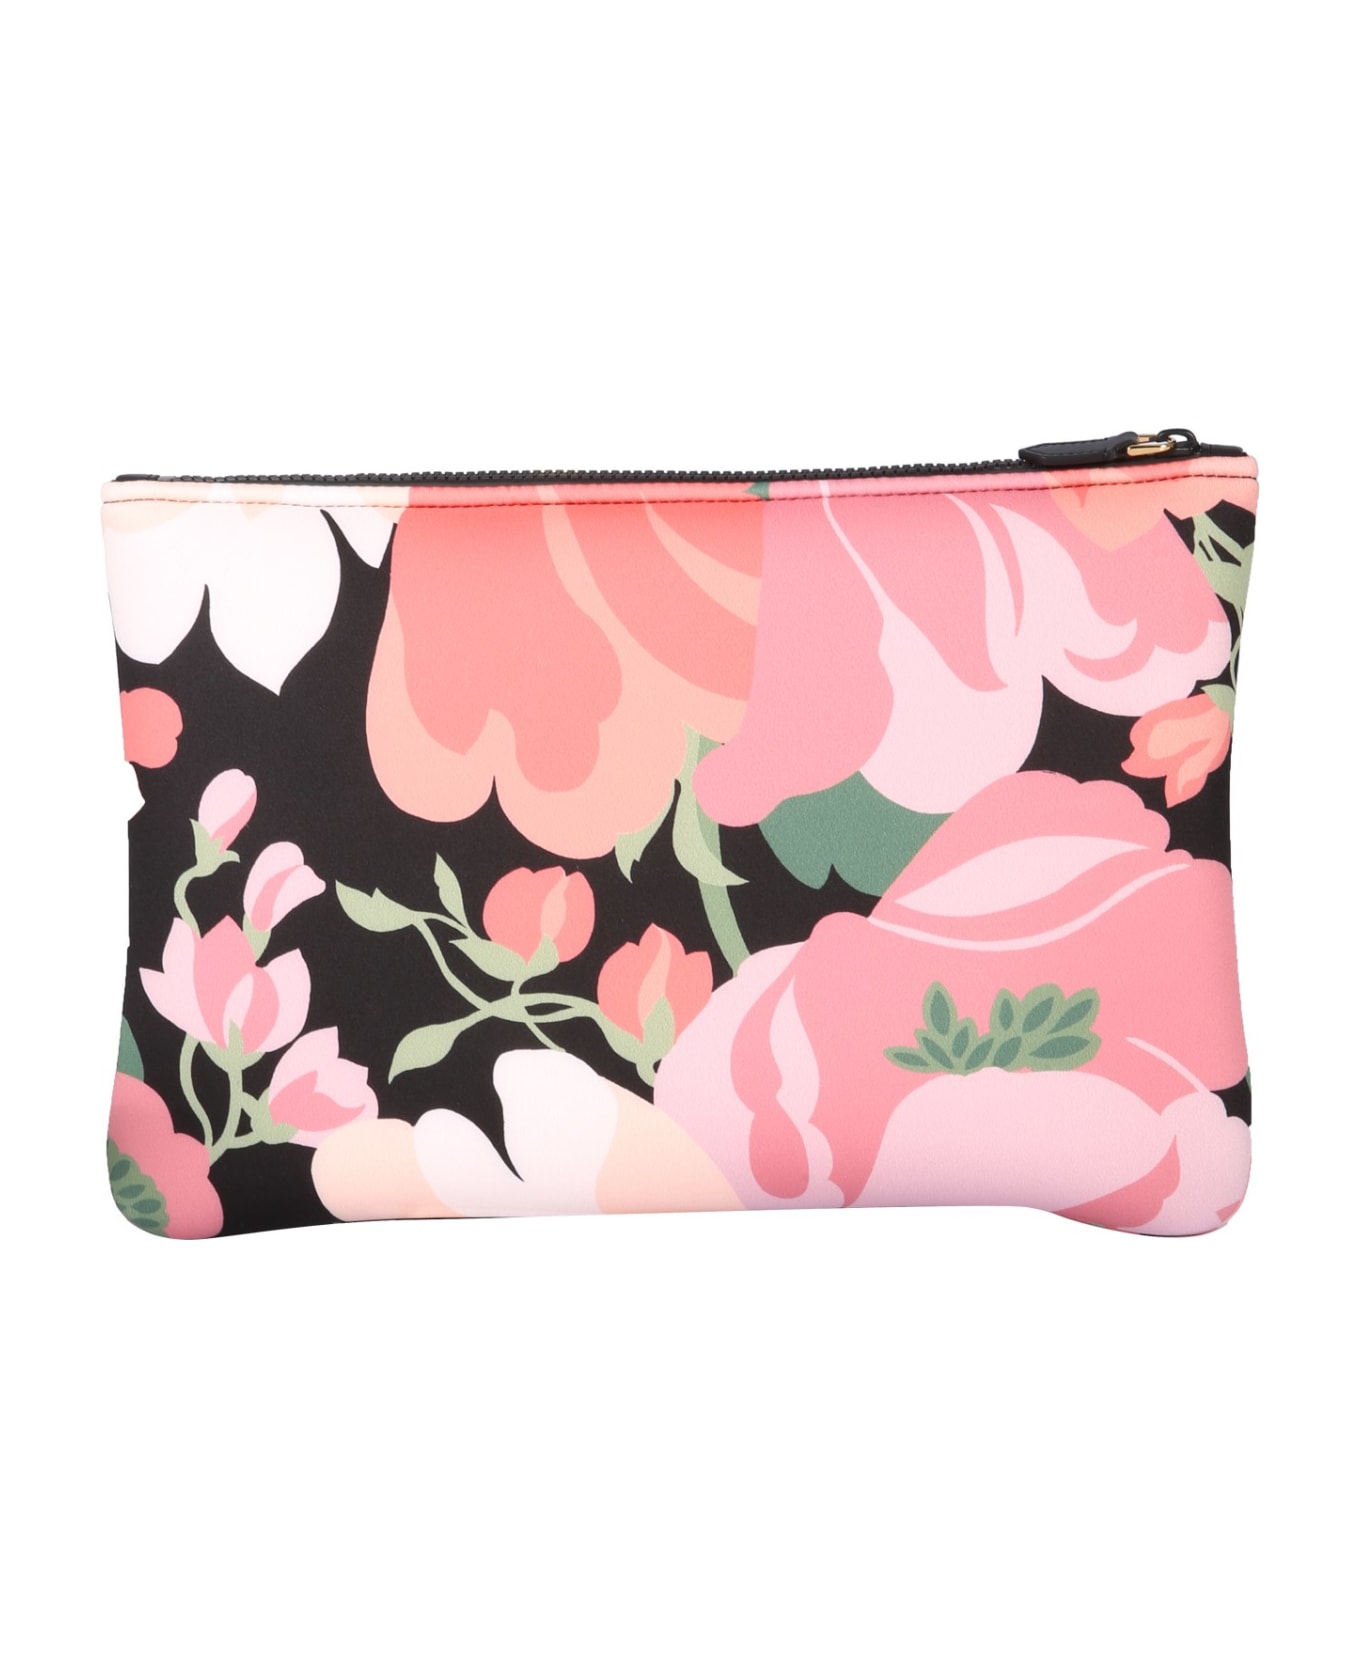 Tom Ford Floral Print Pouch - ROSA